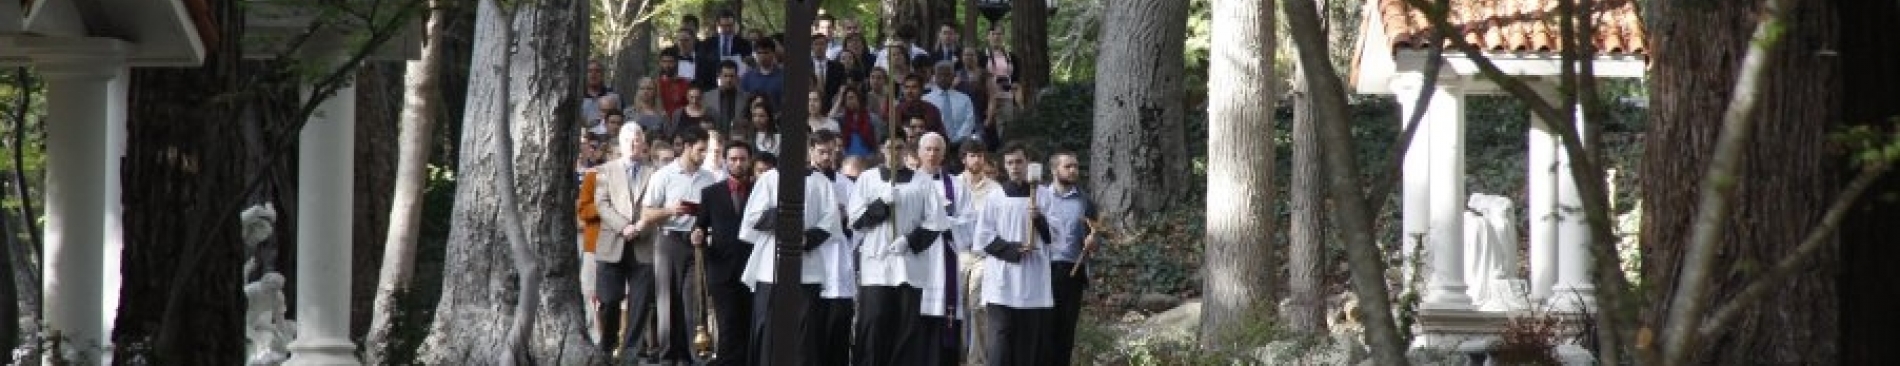 College Dedicates New Stations of the Cross: Story & Slidesh